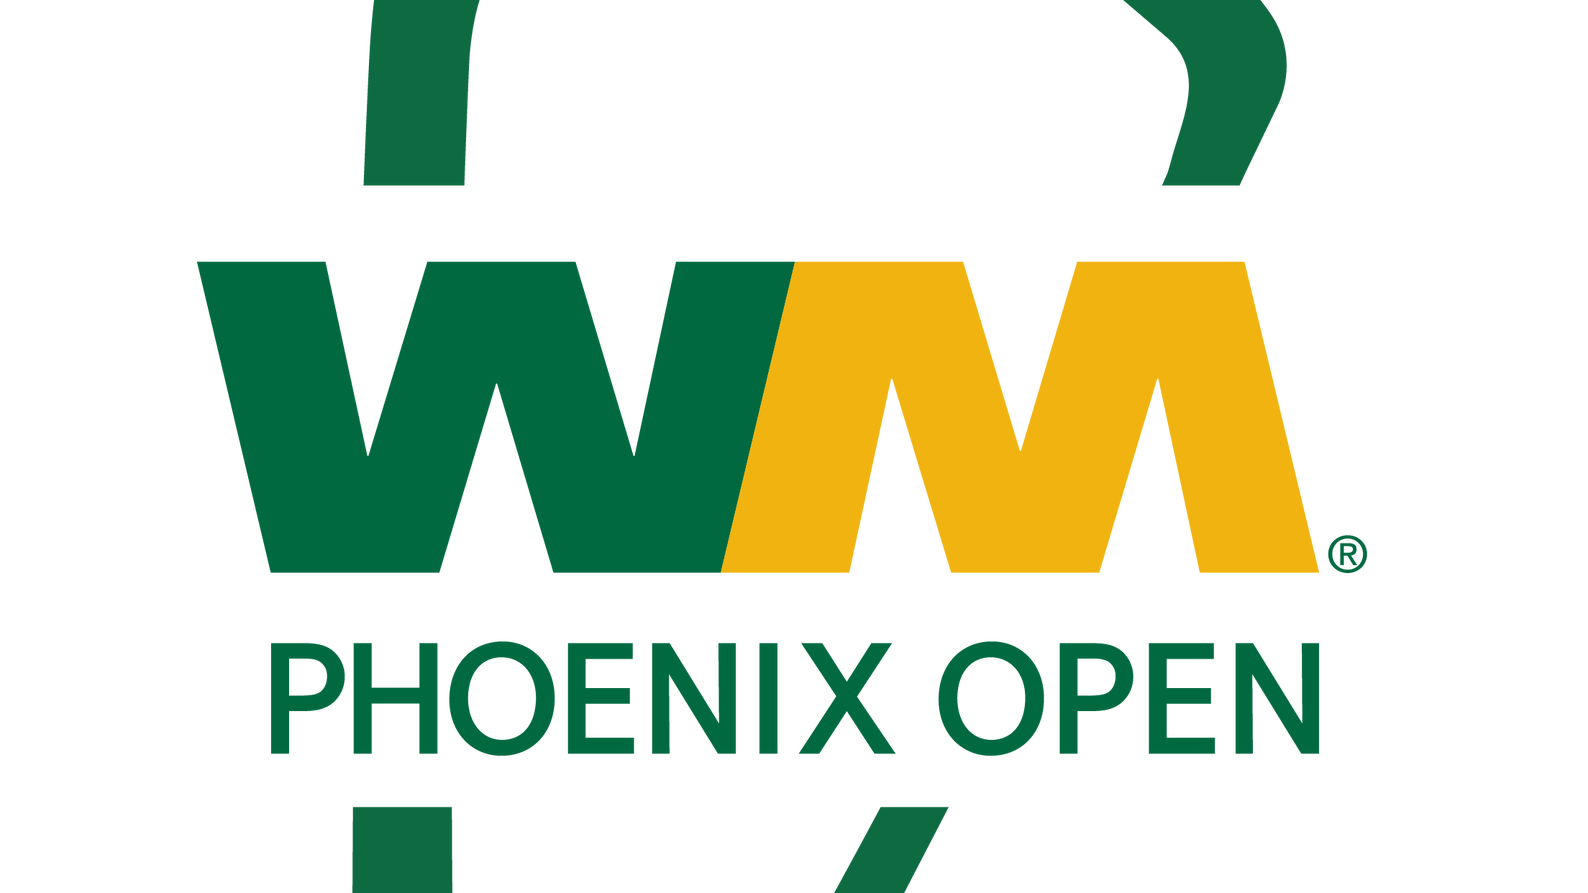 New Waste Management Phoenix Open logo for the 2021 tournament and beyond.